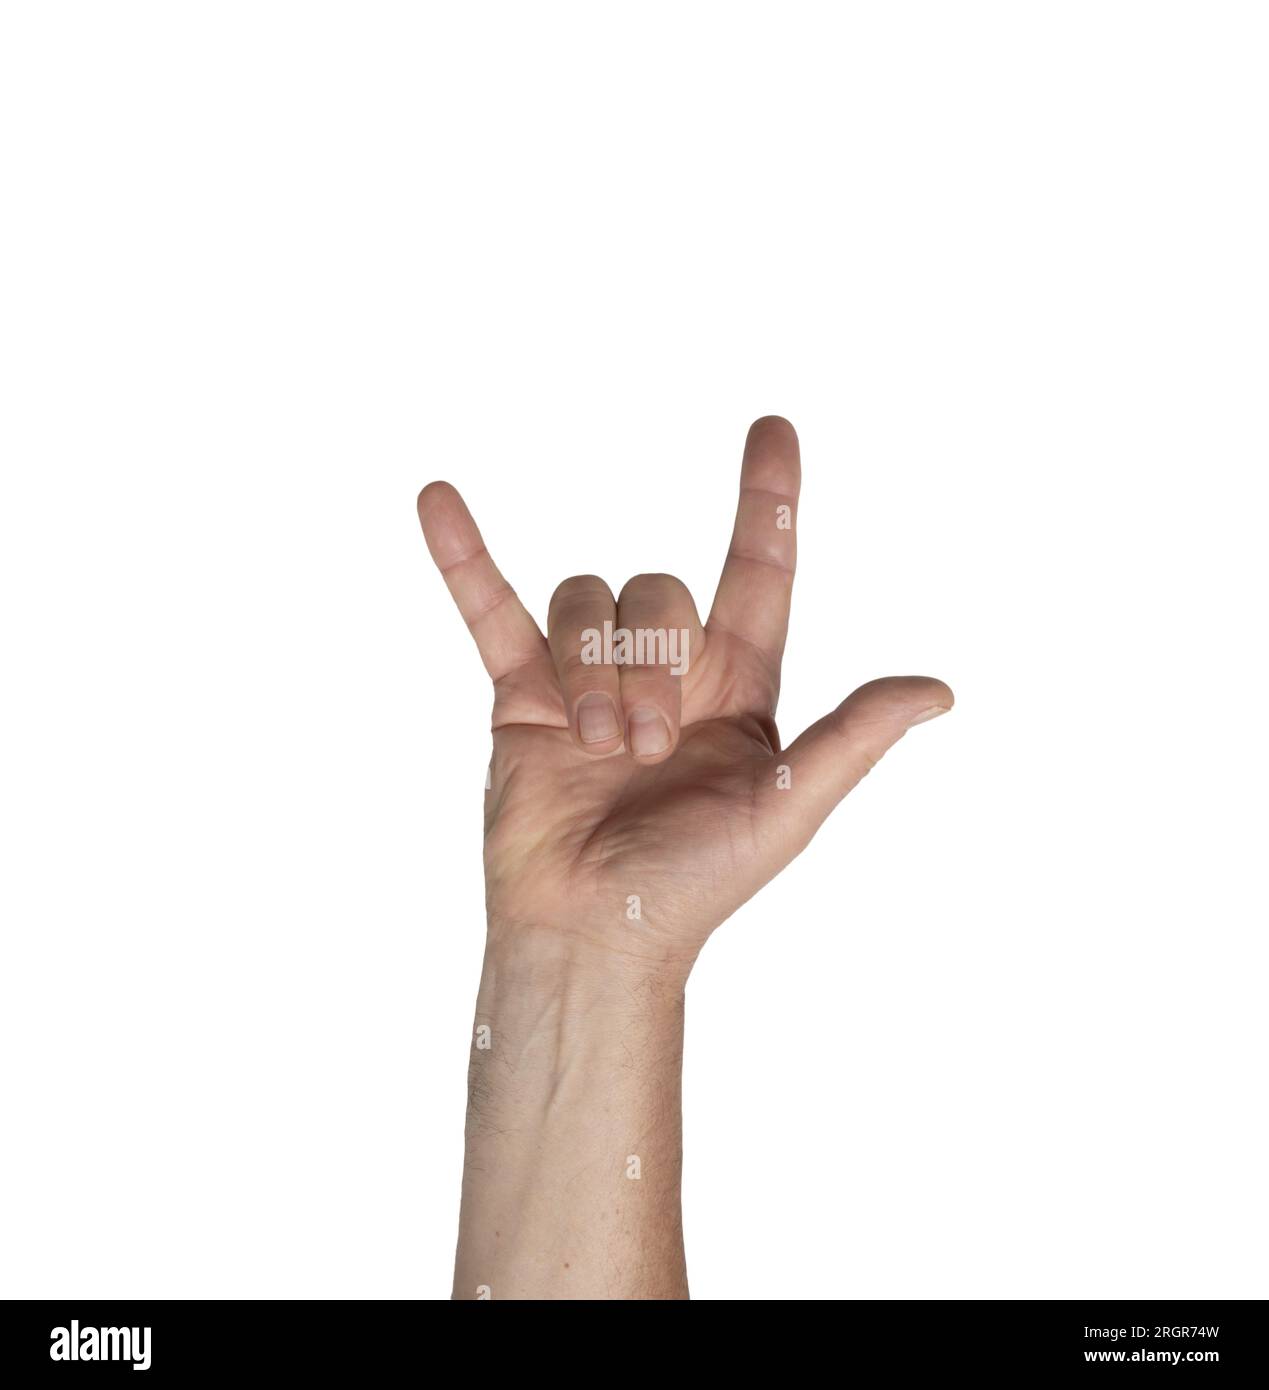 sign with three fingers of the hand I love you on a transparent background Stock Photo